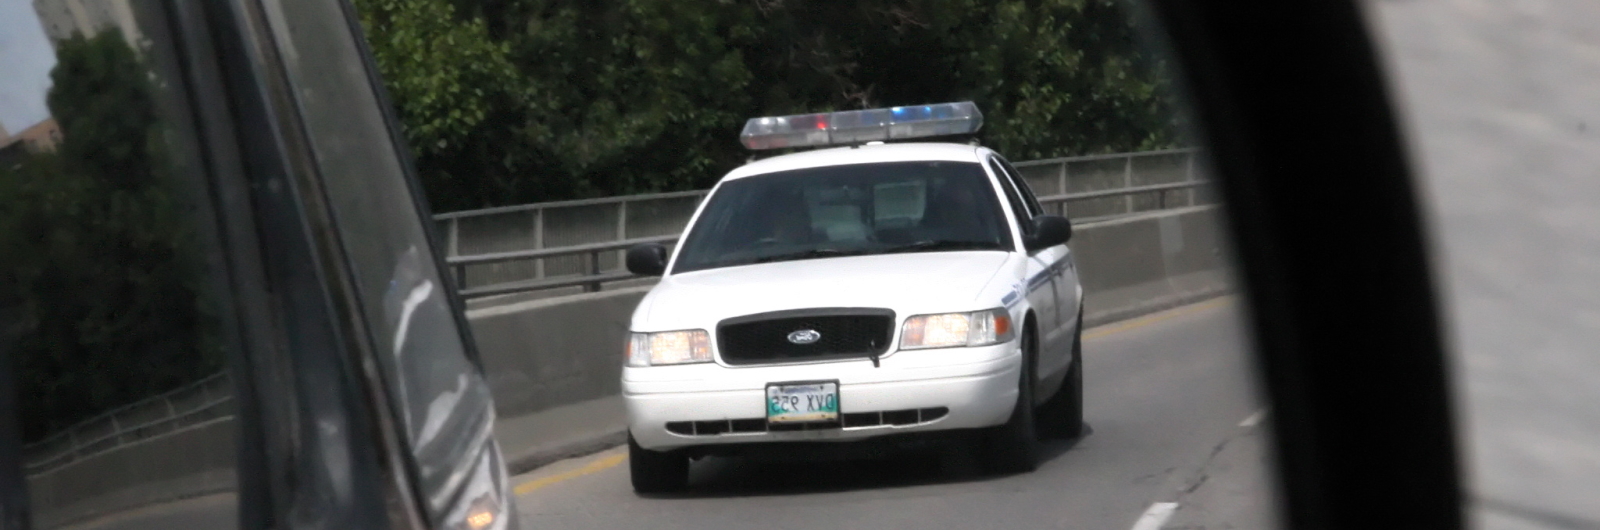 Traffic Violations Attorneys In Fort Mill Greenville And Rock Hill Sc